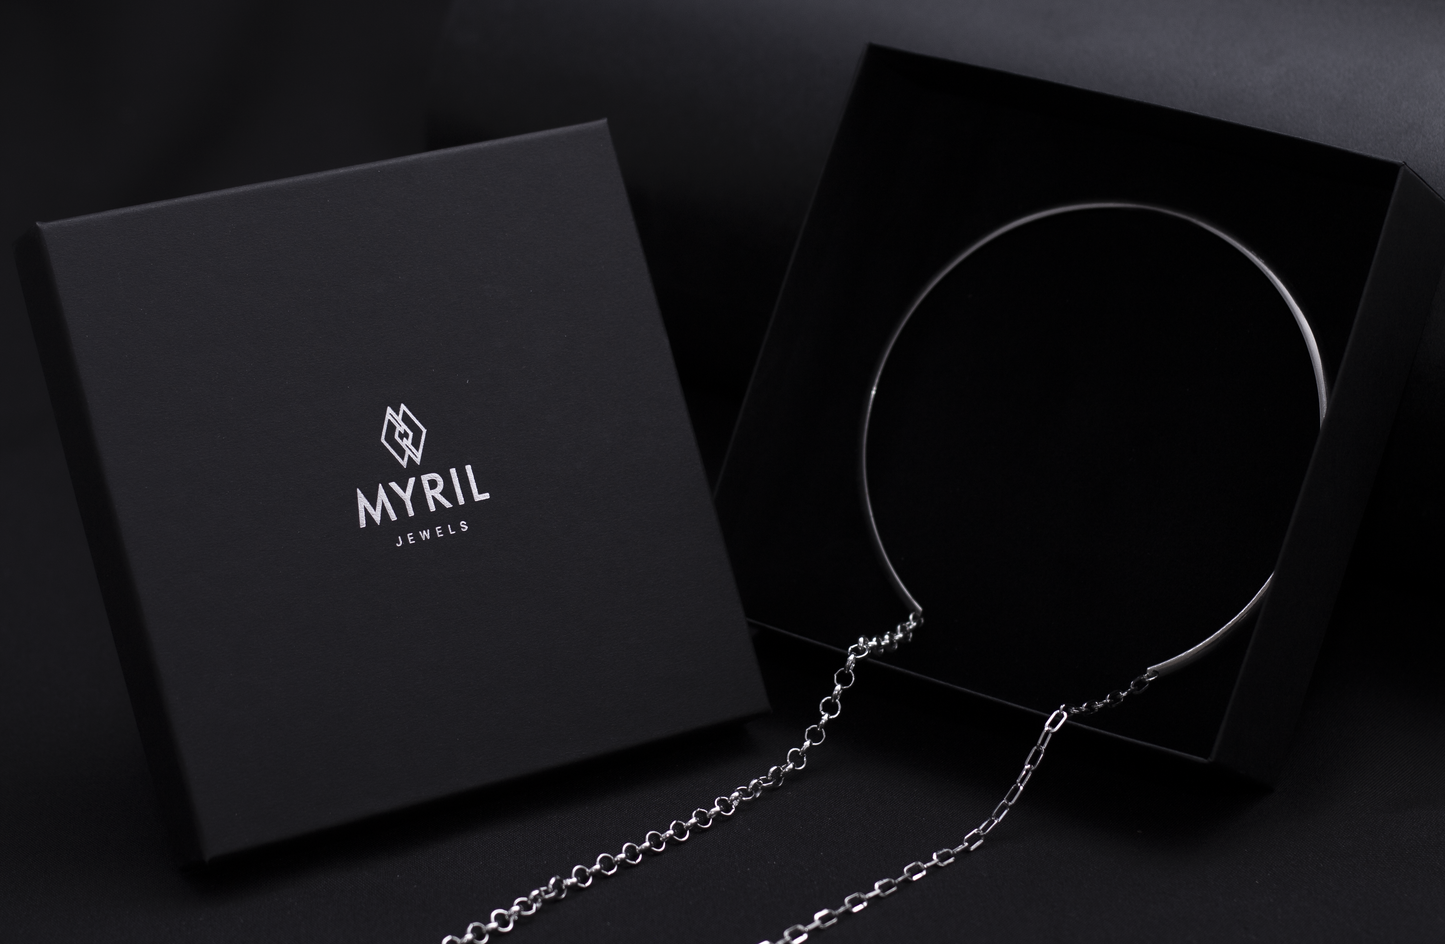 Elegant Myril Jewels packaging presents a sleek, rigid necklace with long hanging chains, reflecting a minimalist neo-goth style for the modern, dark-avantgarde enthusiast.